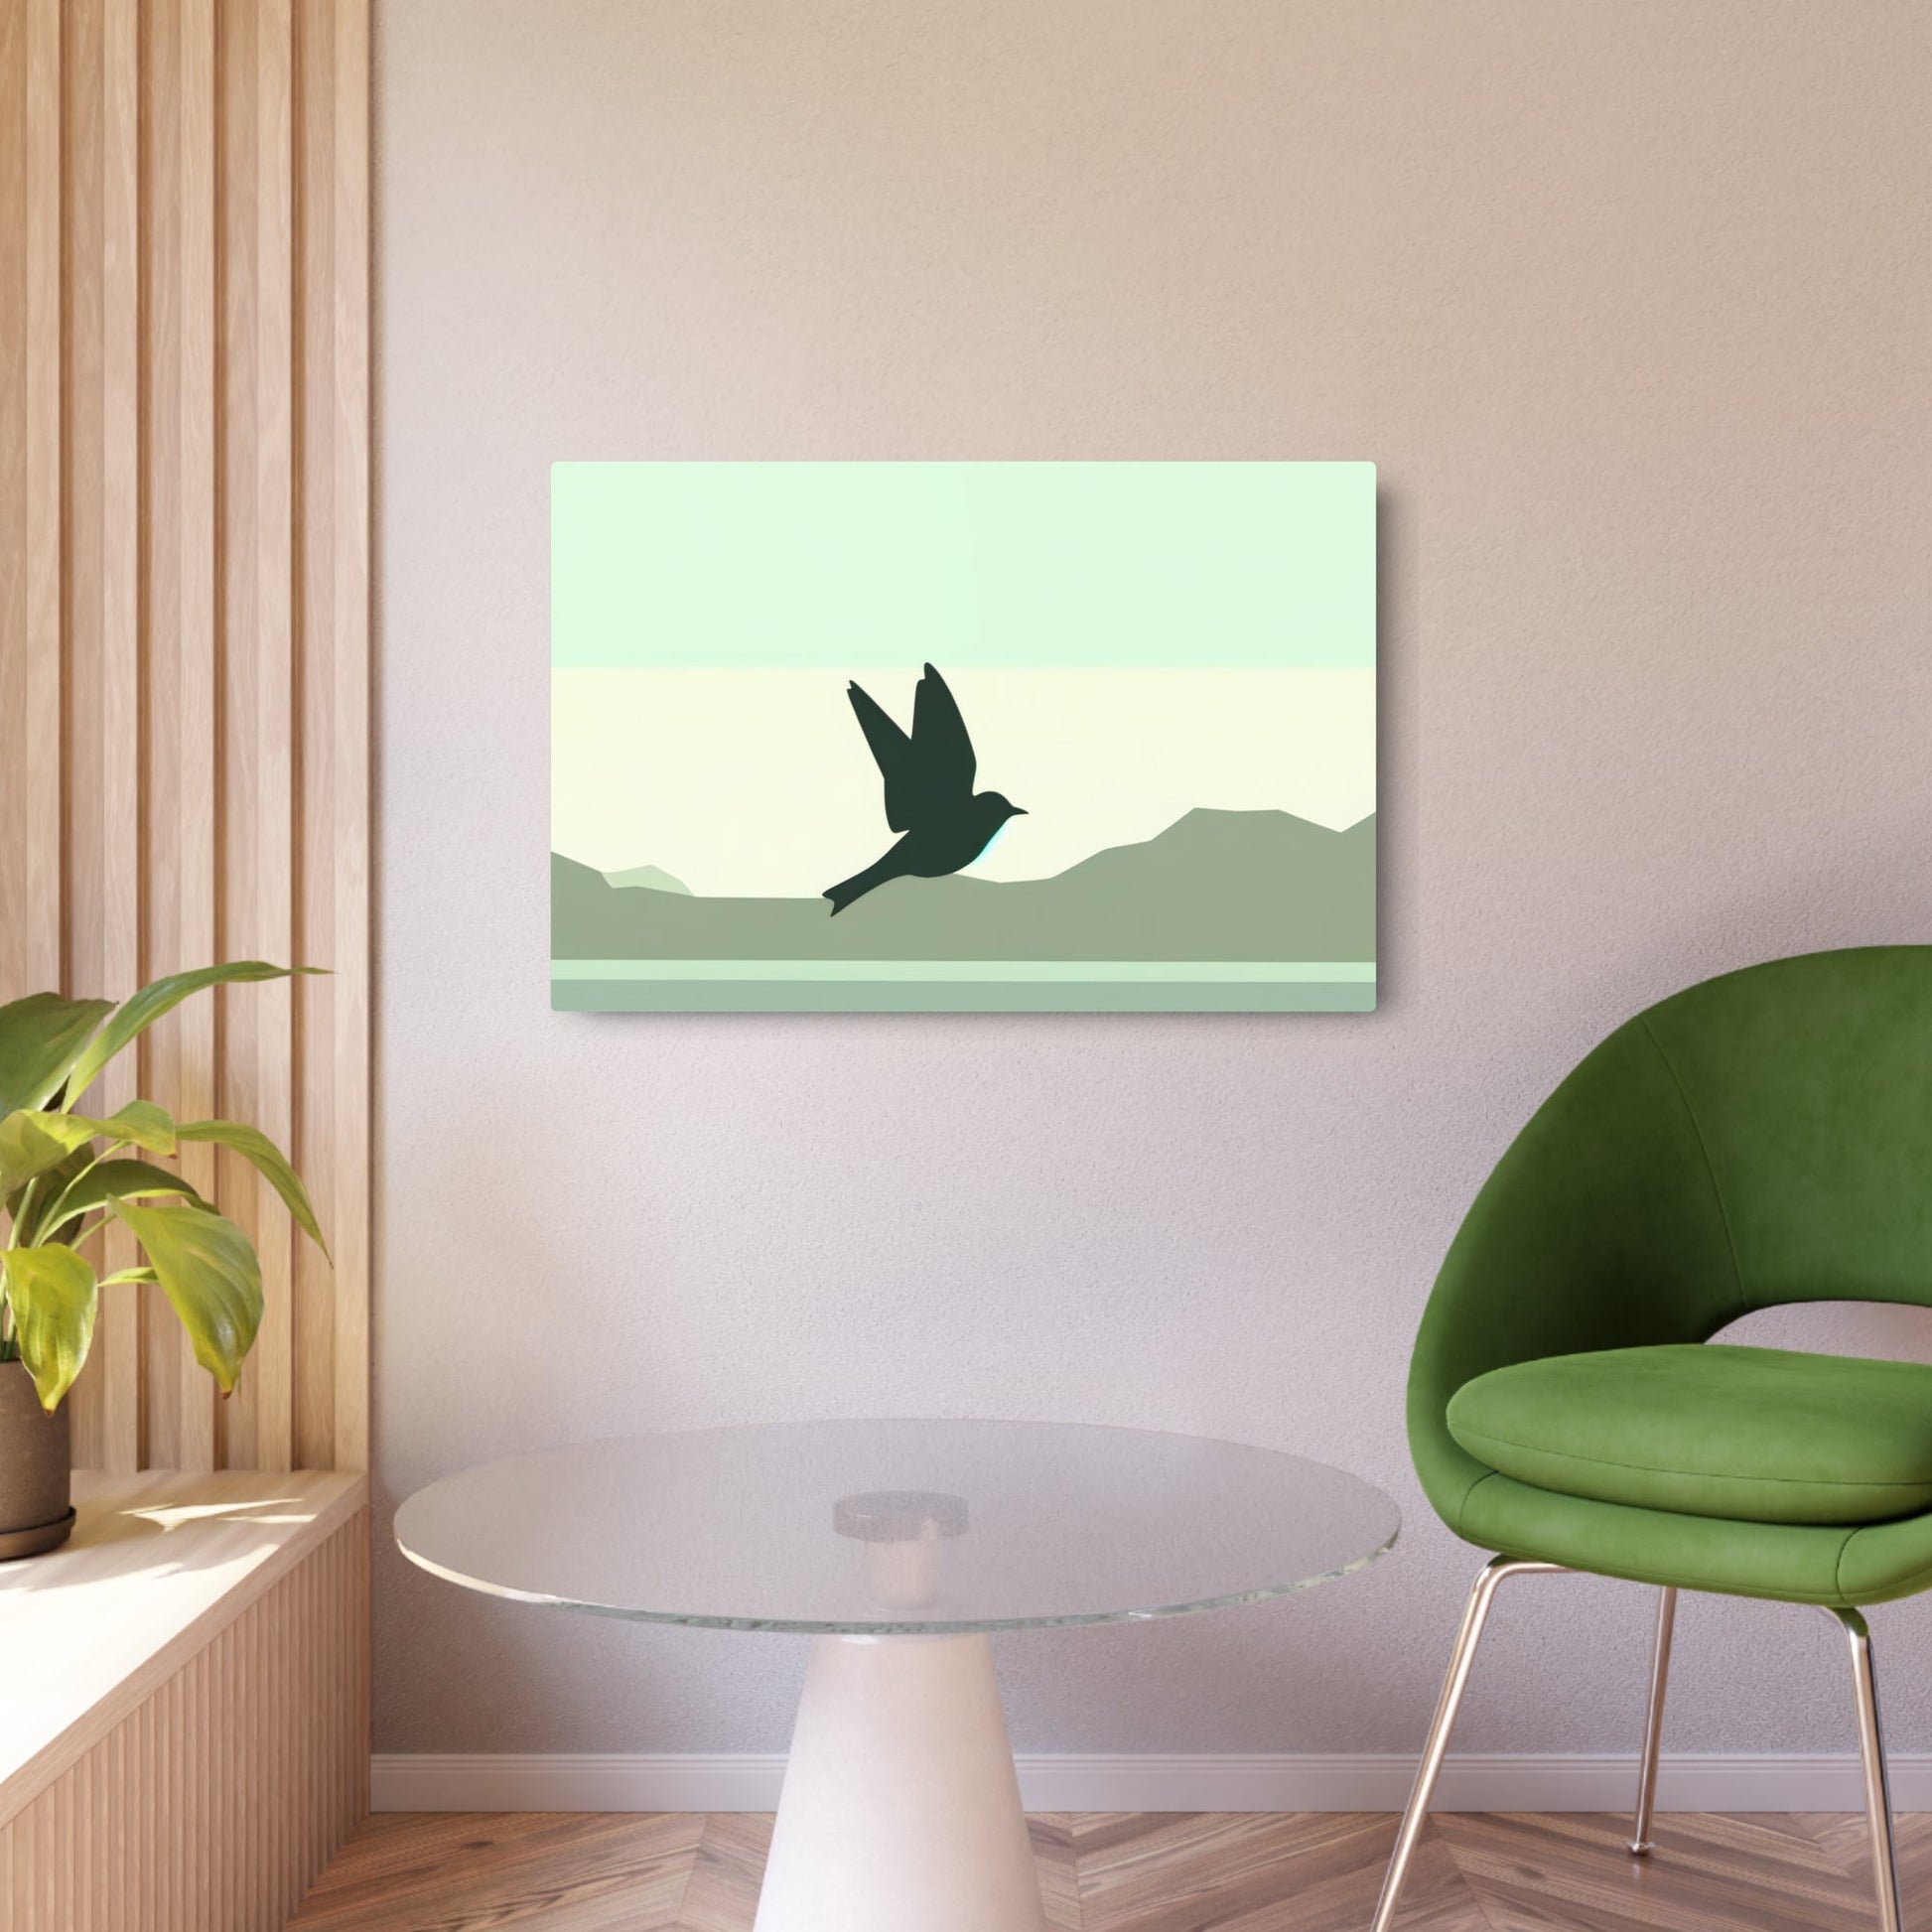 Metal Poster Art | "Minimalist Bird Art - Modern & Contemporary Style Minimalism Design in Simple Shapes and Colors" - Metal Poster Art 36″ x 24″ (Horizontal) 0.12''